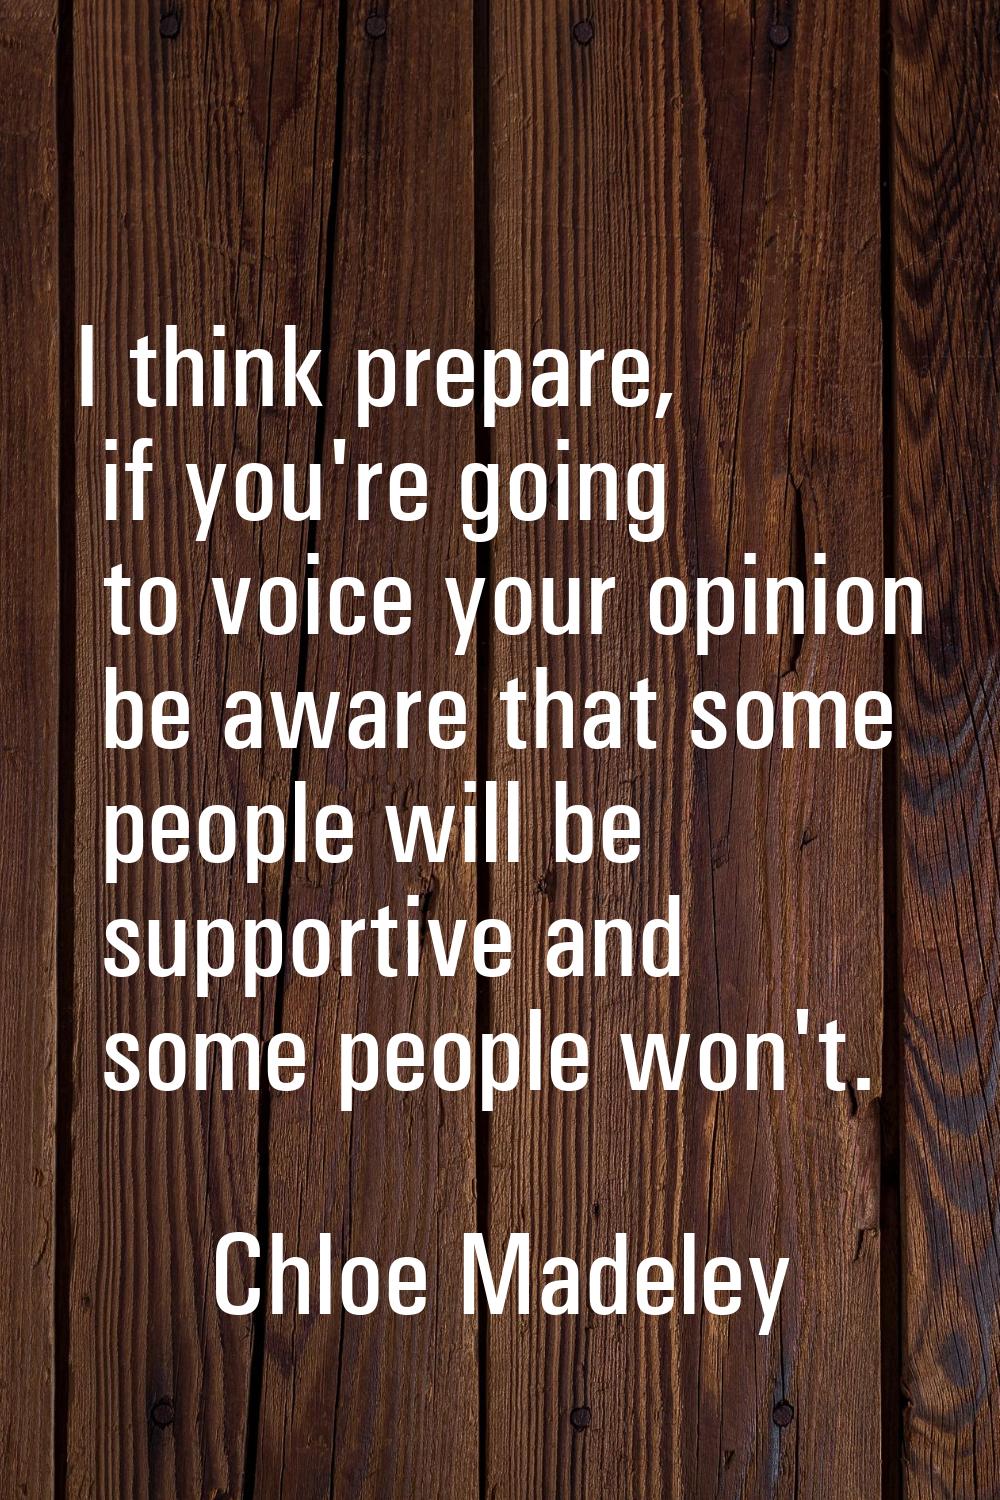 I think prepare, if you're going to voice your opinion be aware that some people will be supportive